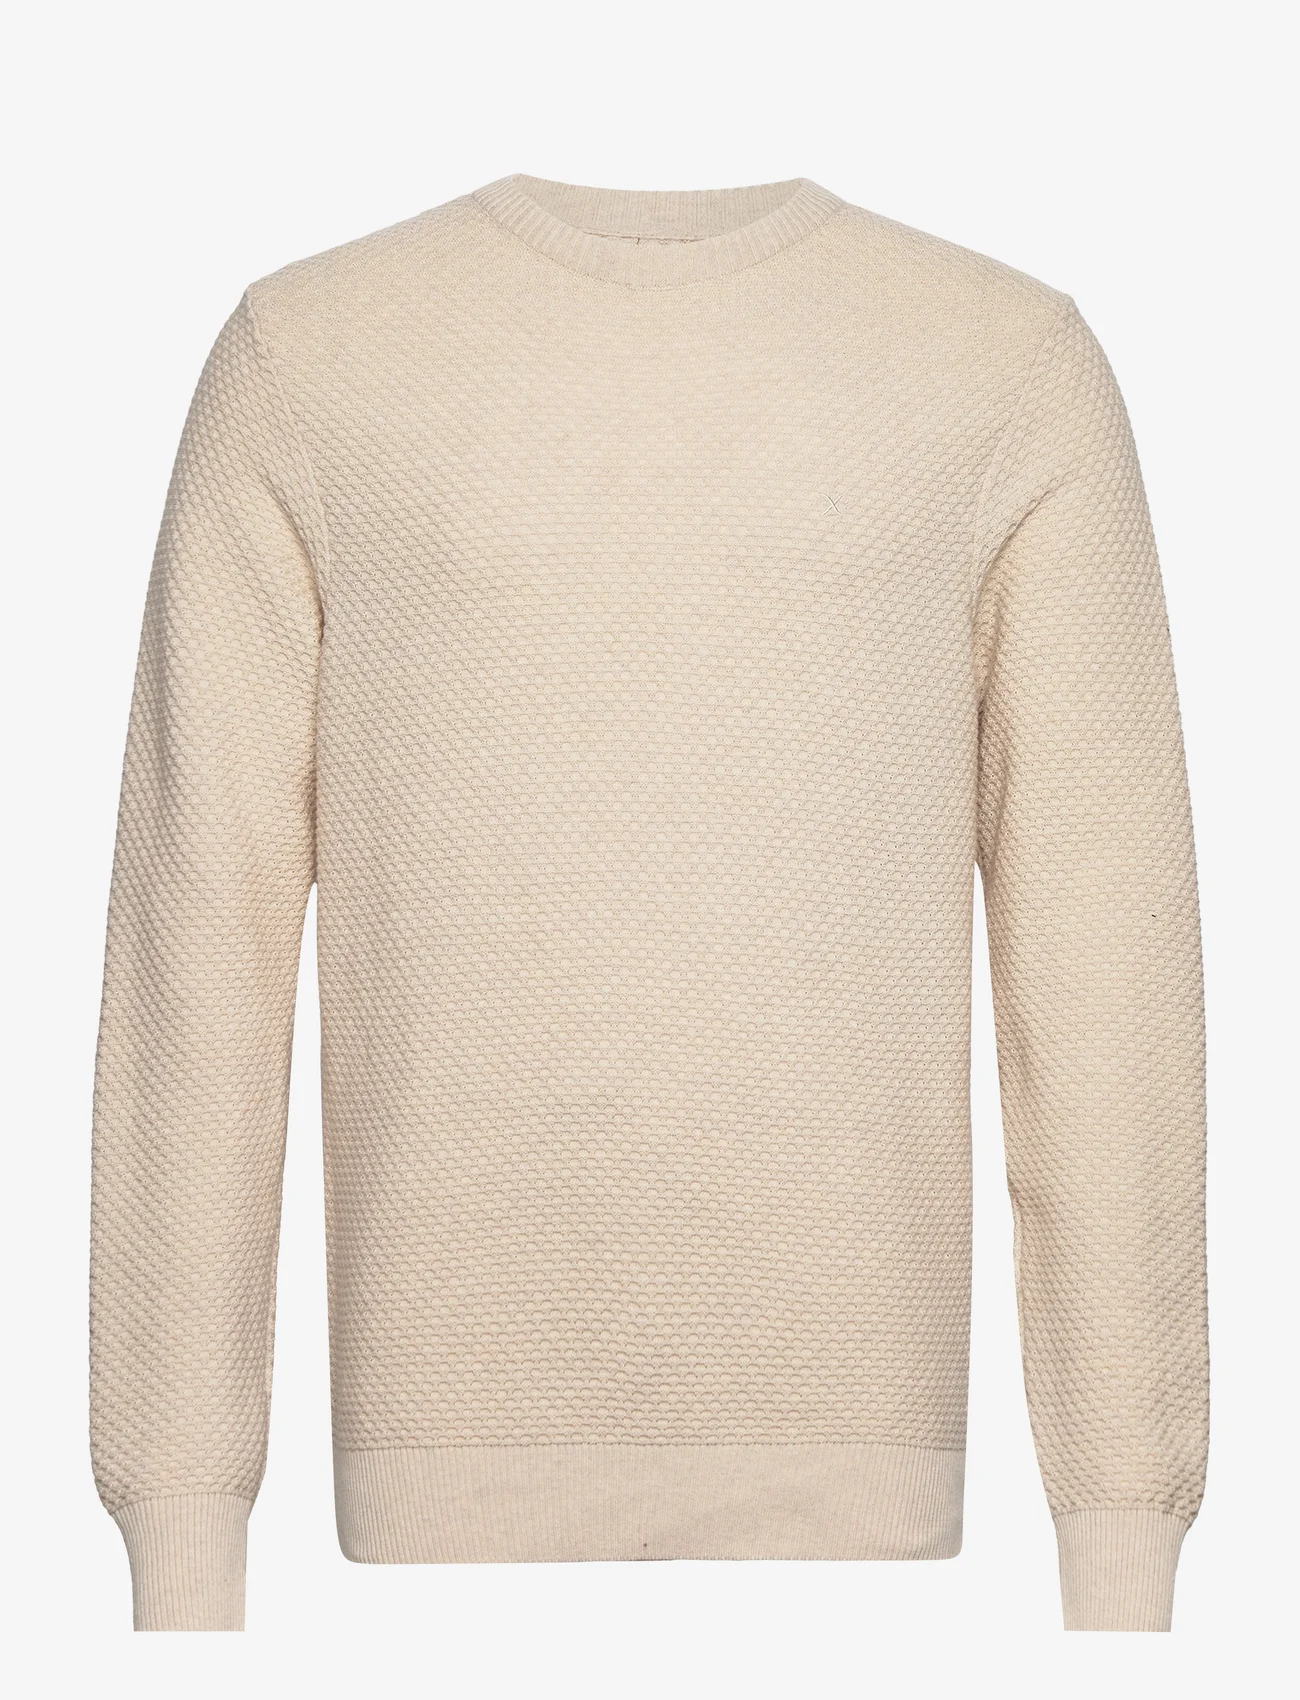 Clean Cut Copenhagen - Oliver Recycled O-neck Knit - knitted round necks - sand - 0